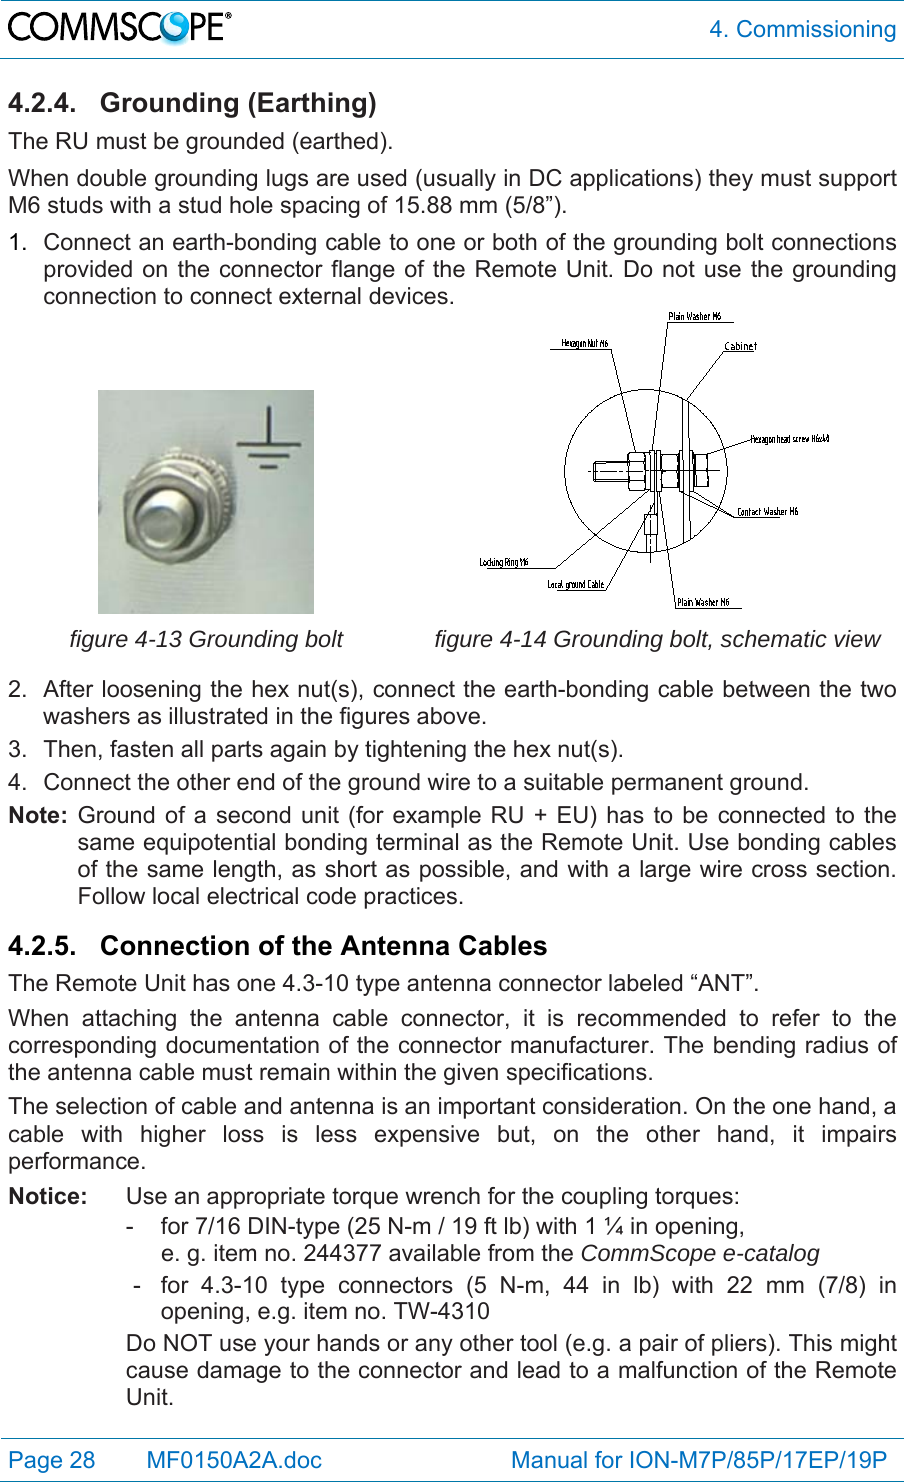  4. Commissioning Page 28   MF0150A2A.doc                             Manual for ION-M7P/85P/17EP/19P  4.2.4. Grounding (Earthing) The RU must be grounded (earthed). When double grounding lugs are used (usually in DC applications) they must support M6 studs with a stud hole spacing of 15.88 mm (5/8”). 1.  Connect an earth-bonding cable to one or both of the grounding bolt connections provided on the connector flange of the Remote Unit. Do not use the grounding connection to connect external devices.  figure 4-13 Grounding bolt  figure 4-14 Grounding bolt, schematic view 2.  After loosening the hex nut(s), connect the earth-bonding cable between the two washers as illustrated in the figures above. 3.  Then, fasten all parts again by tightening the hex nut(s). 4.  Connect the other end of the ground wire to a suitable permanent ground. Note: Ground of a second unit (for example RU + EU) has to be connected to the same equipotential bonding terminal as the Remote Unit. Use bonding cables of the same length, as short as possible, and with a large wire cross section. Follow local electrical code practices.  4.2.5. Connection of the Antenna Cables The Remote Unit has one 4.3-10 type antenna connector labeled “ANT”. When attaching the antenna cable connector, it is recommended to refer to the corresponding documentation of the connector manufacturer. The bending radius of the antenna cable must remain within the given specifications. The selection of cable and antenna is an important consideration. On the one hand, a cable with higher loss is less expensive but, on the other hand, it impairs performance.  Notice:  Use an appropriate torque wrench for the coupling torques:   -  for 7/16 DIN-type (25 N-m / 19 ft lb) with 1 ¼ in opening,      e. g. item no. 244377 available from the CommScope e-catalog   -  for 4.3-10 type connectors (5 N-m, 44 in lb) with 22 mm (7/8) in opening, e.g. item no. TW-4310 Do NOT use your hands or any other tool (e.g. a pair of pliers). This might cause damage to the connector and lead to a malfunction of the Remote Unit.  